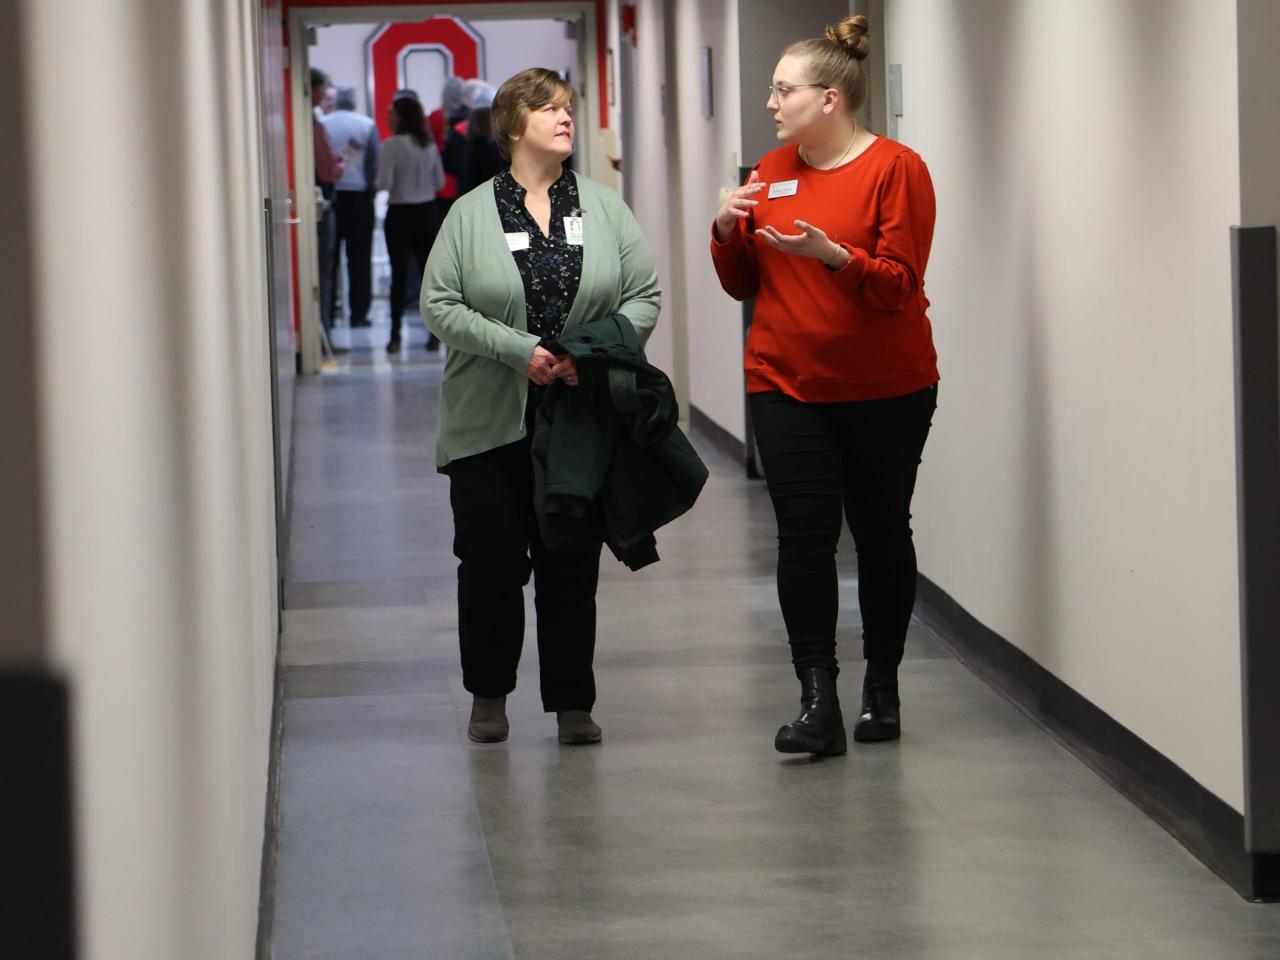 Two women talk as they walk down a hall